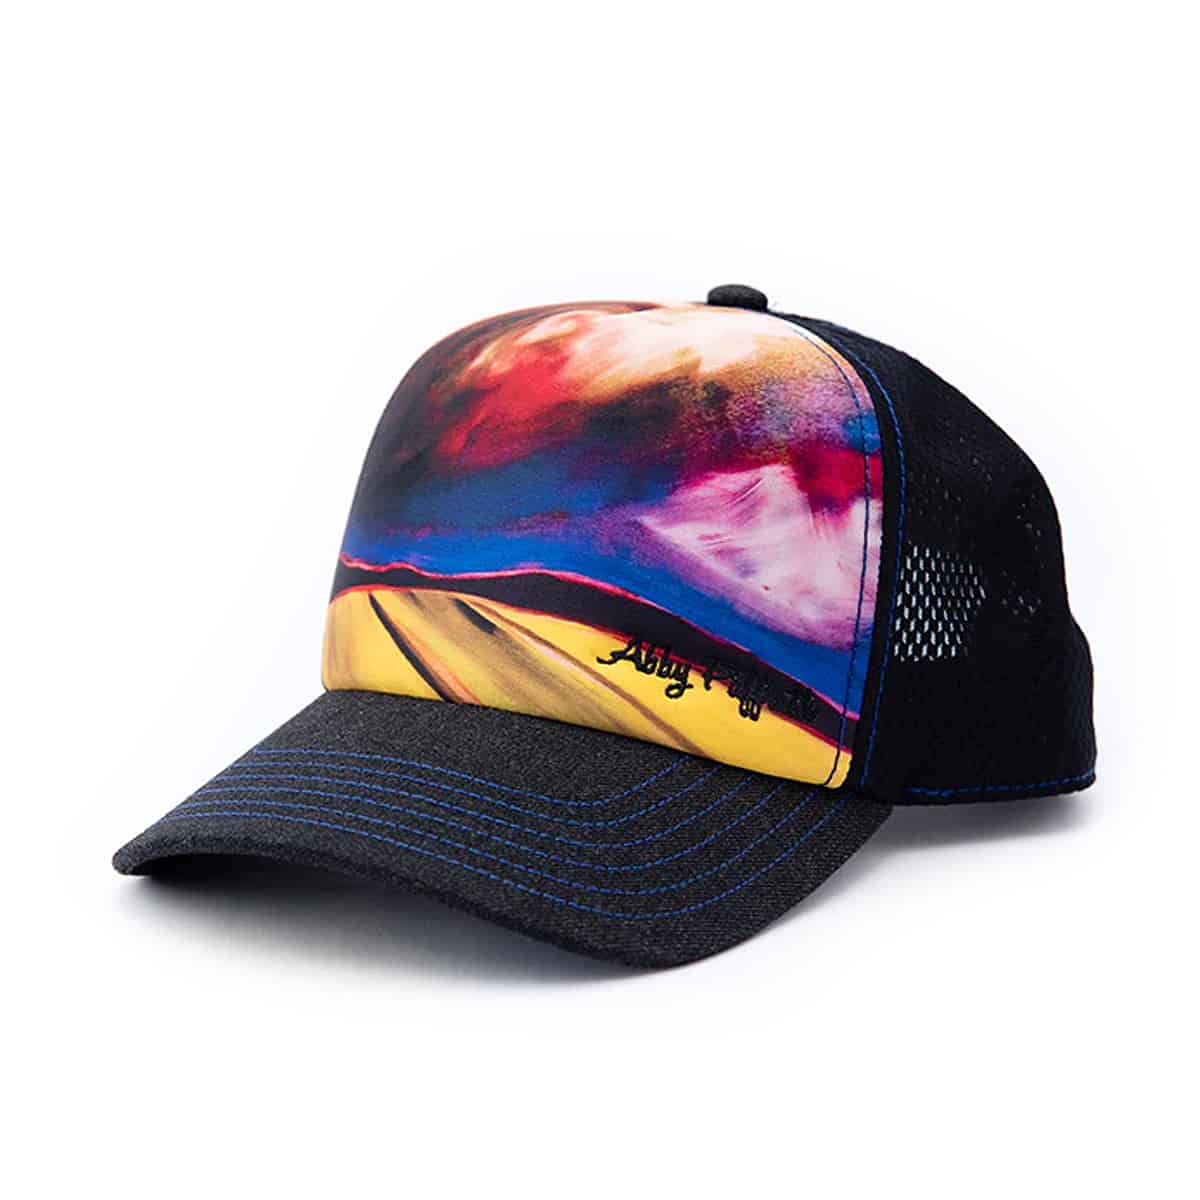 850029265016 art 4 all stormy skies trucker hat by abby paffrath featuring moody sky artwork three quarter